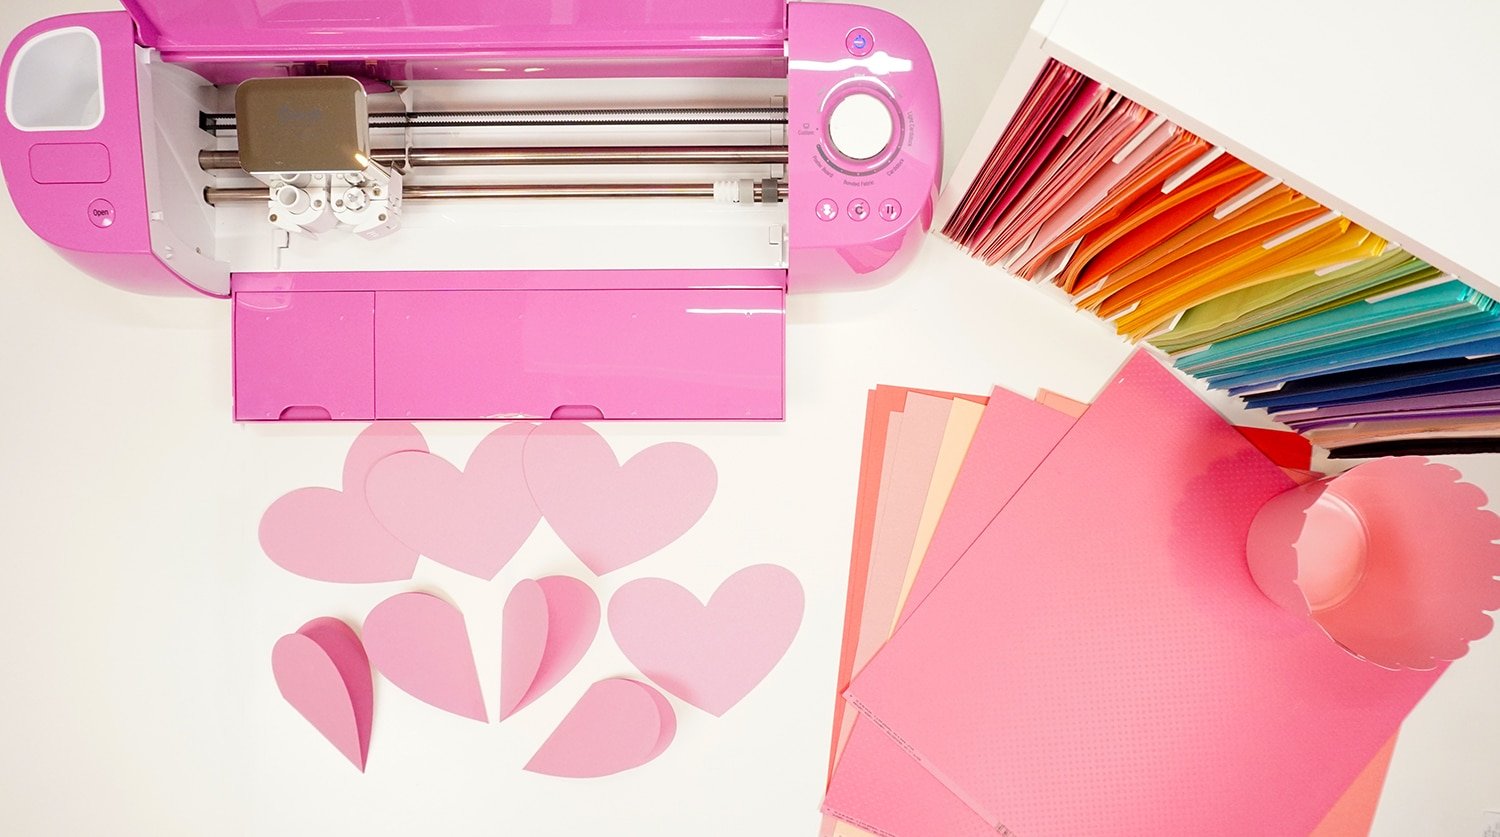 cricut machine with paper cut out hearts and pink paper